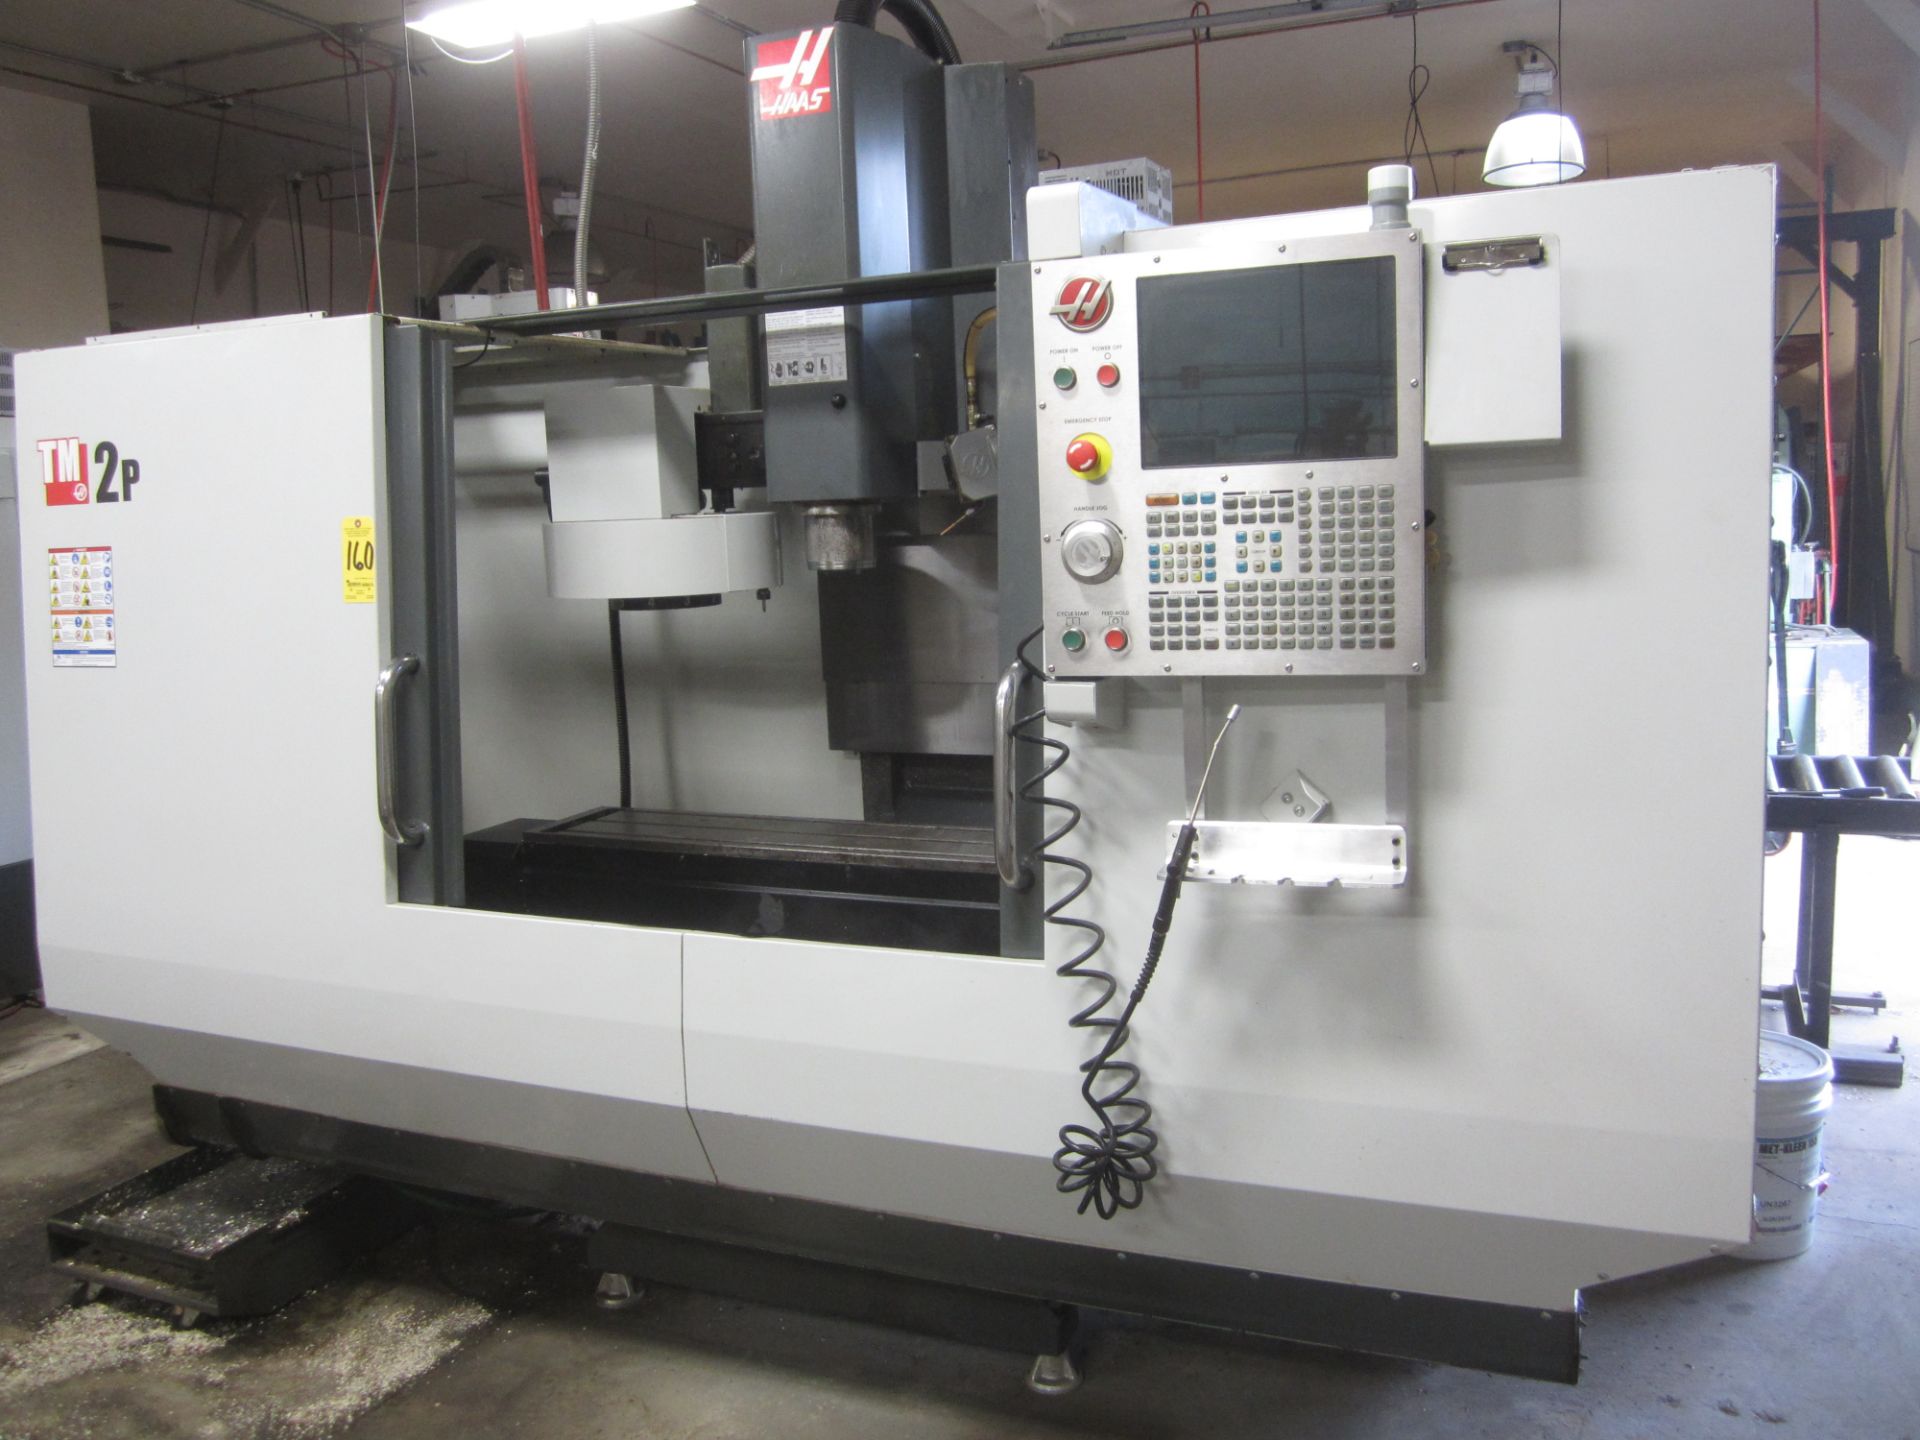 Haas TM2P CNC Vertical Machining Center, s/n 1099977, New 2012, Haas CNC Control, 40 Taper, 10 - Image 2 of 14